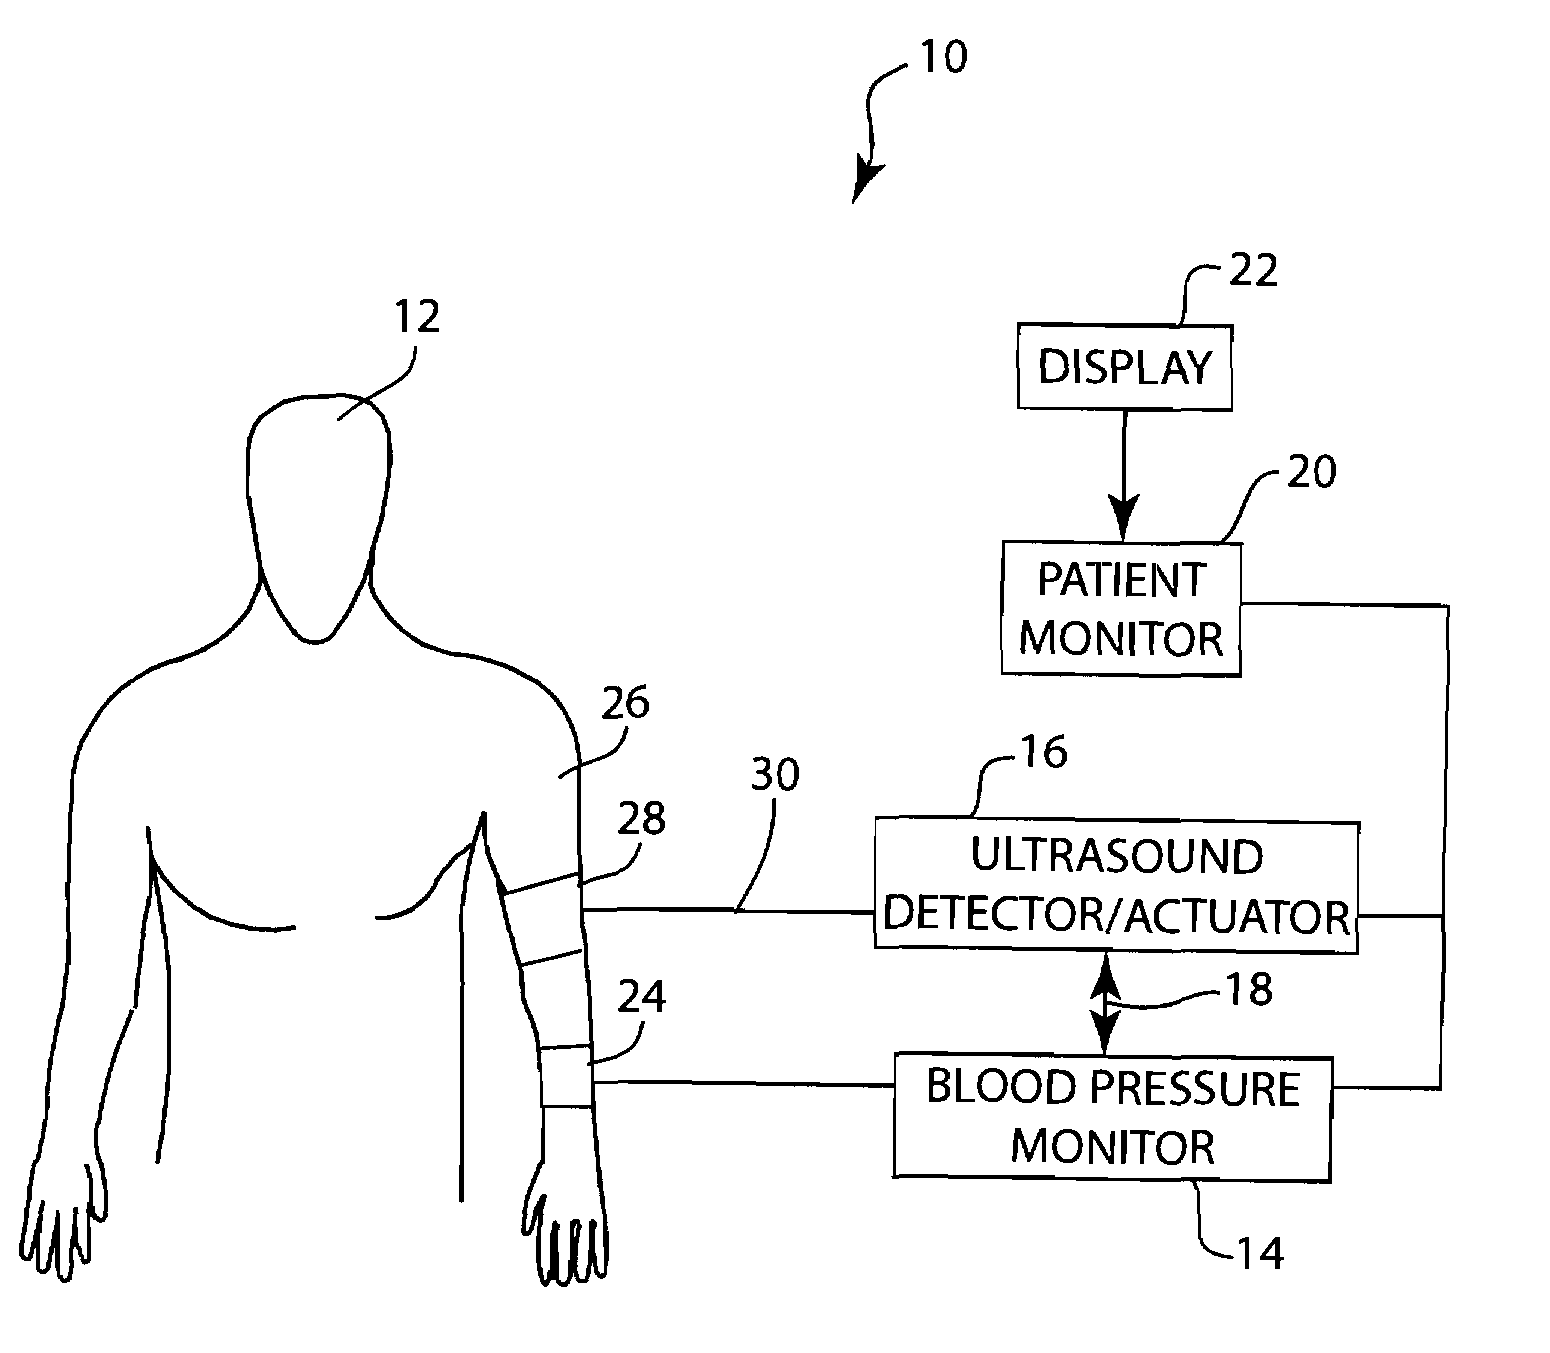 Method and apparatus for automated vascular function testing